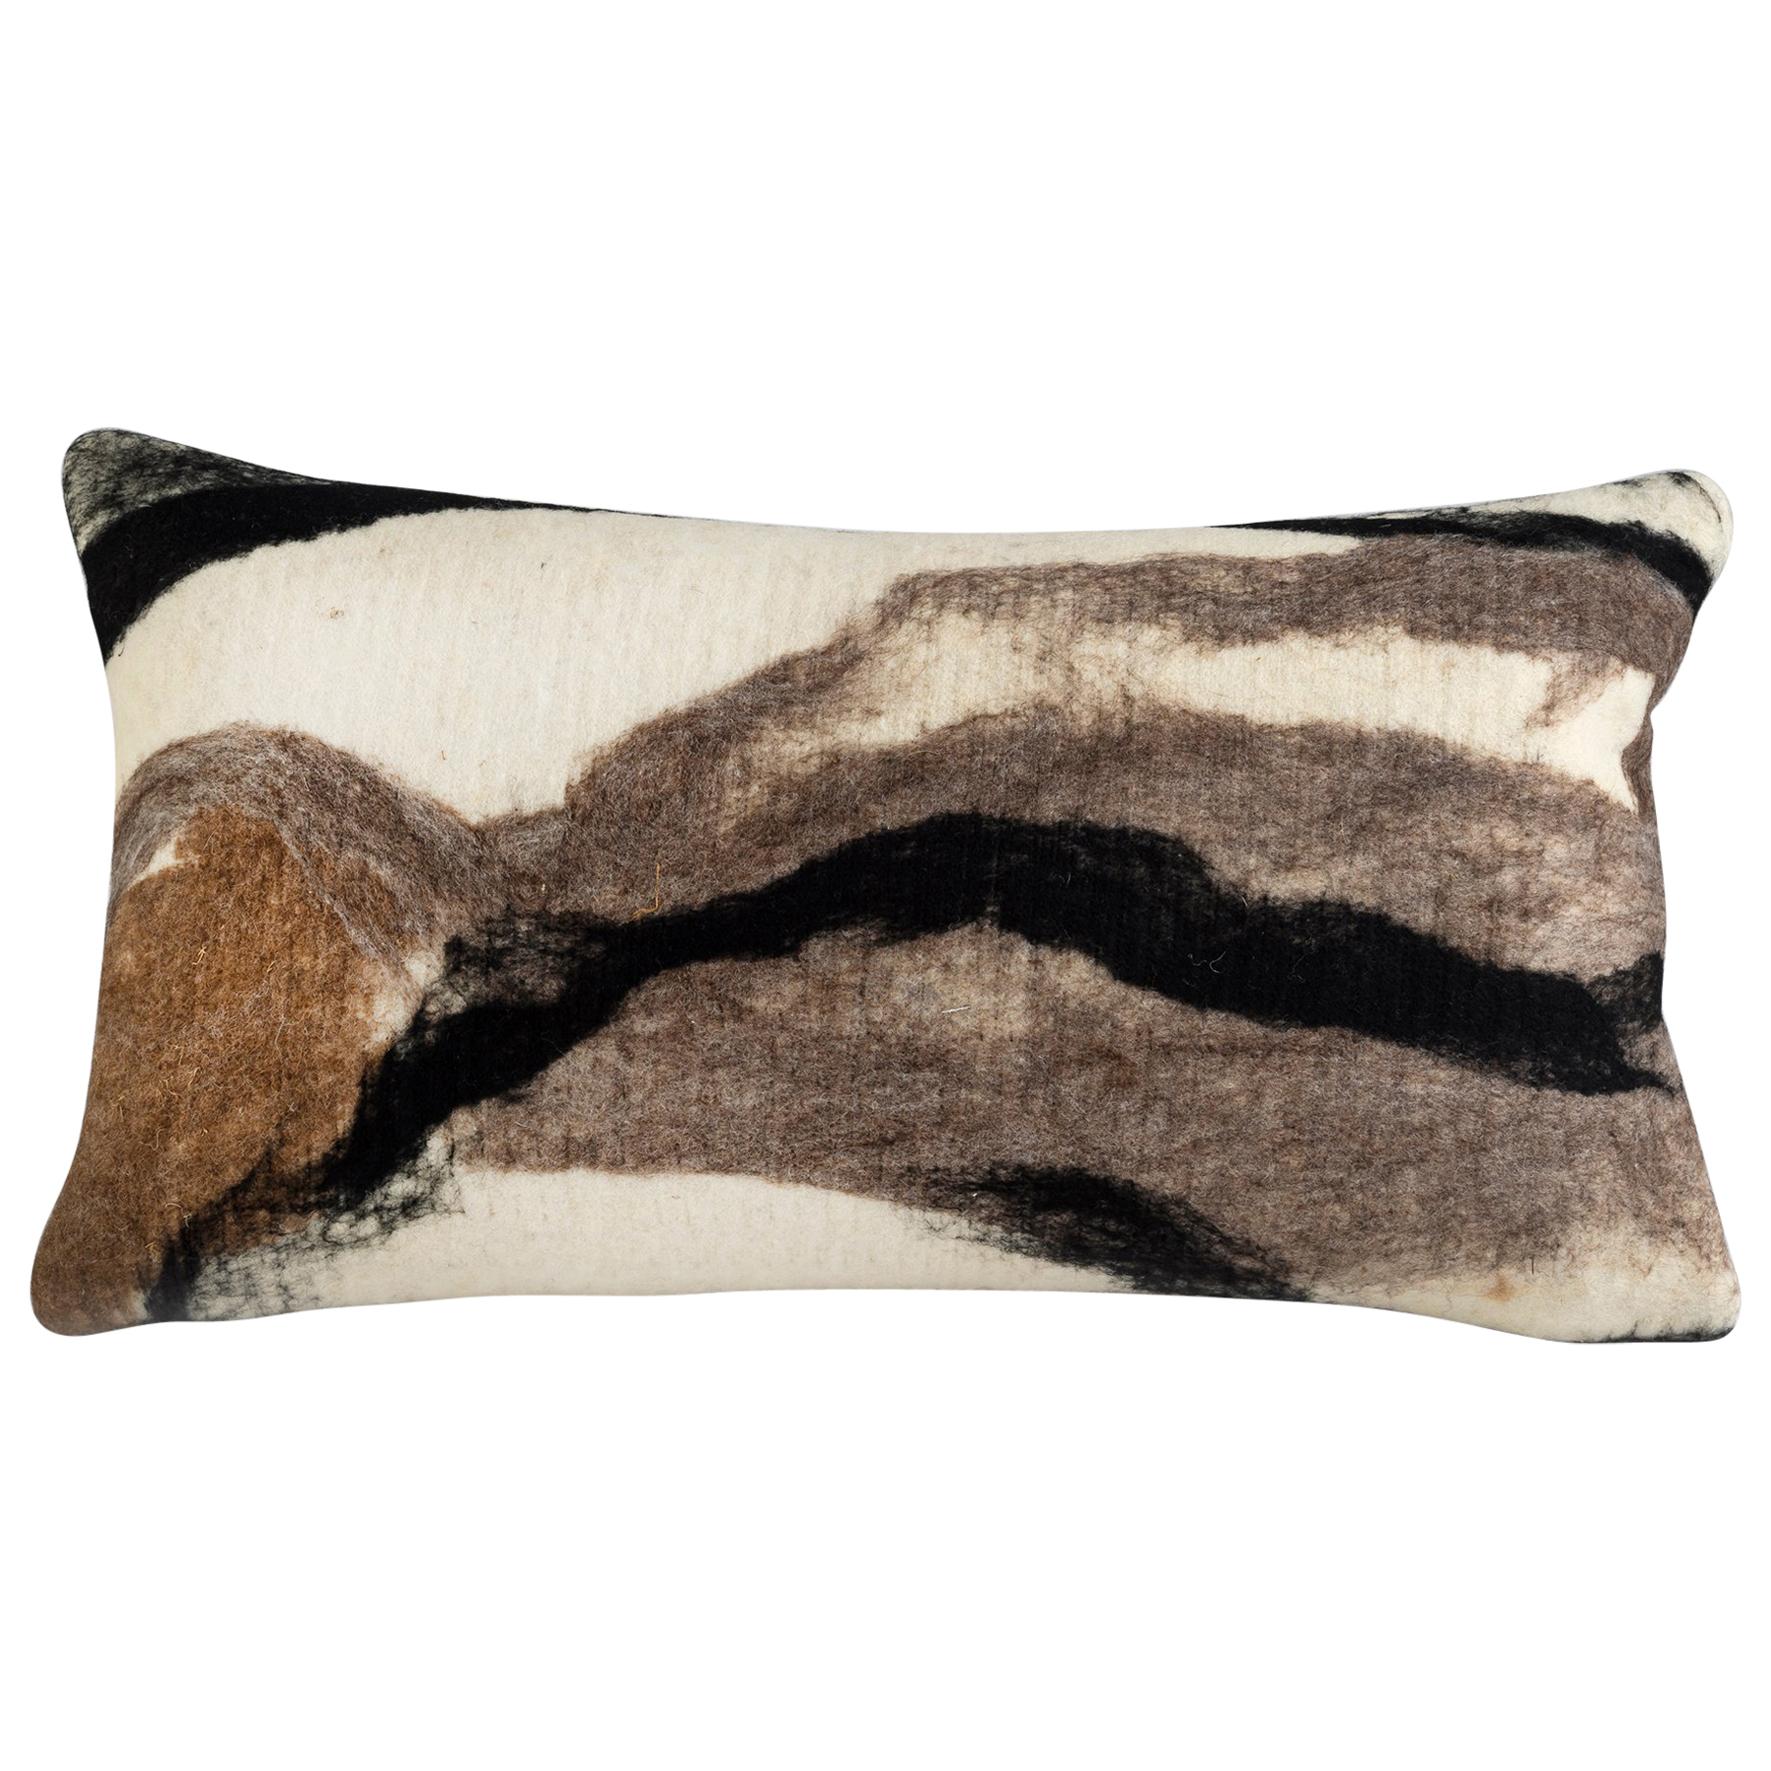 Modern Rustic Wool Pillow Hand-Milled - Heritage Sheep Collection